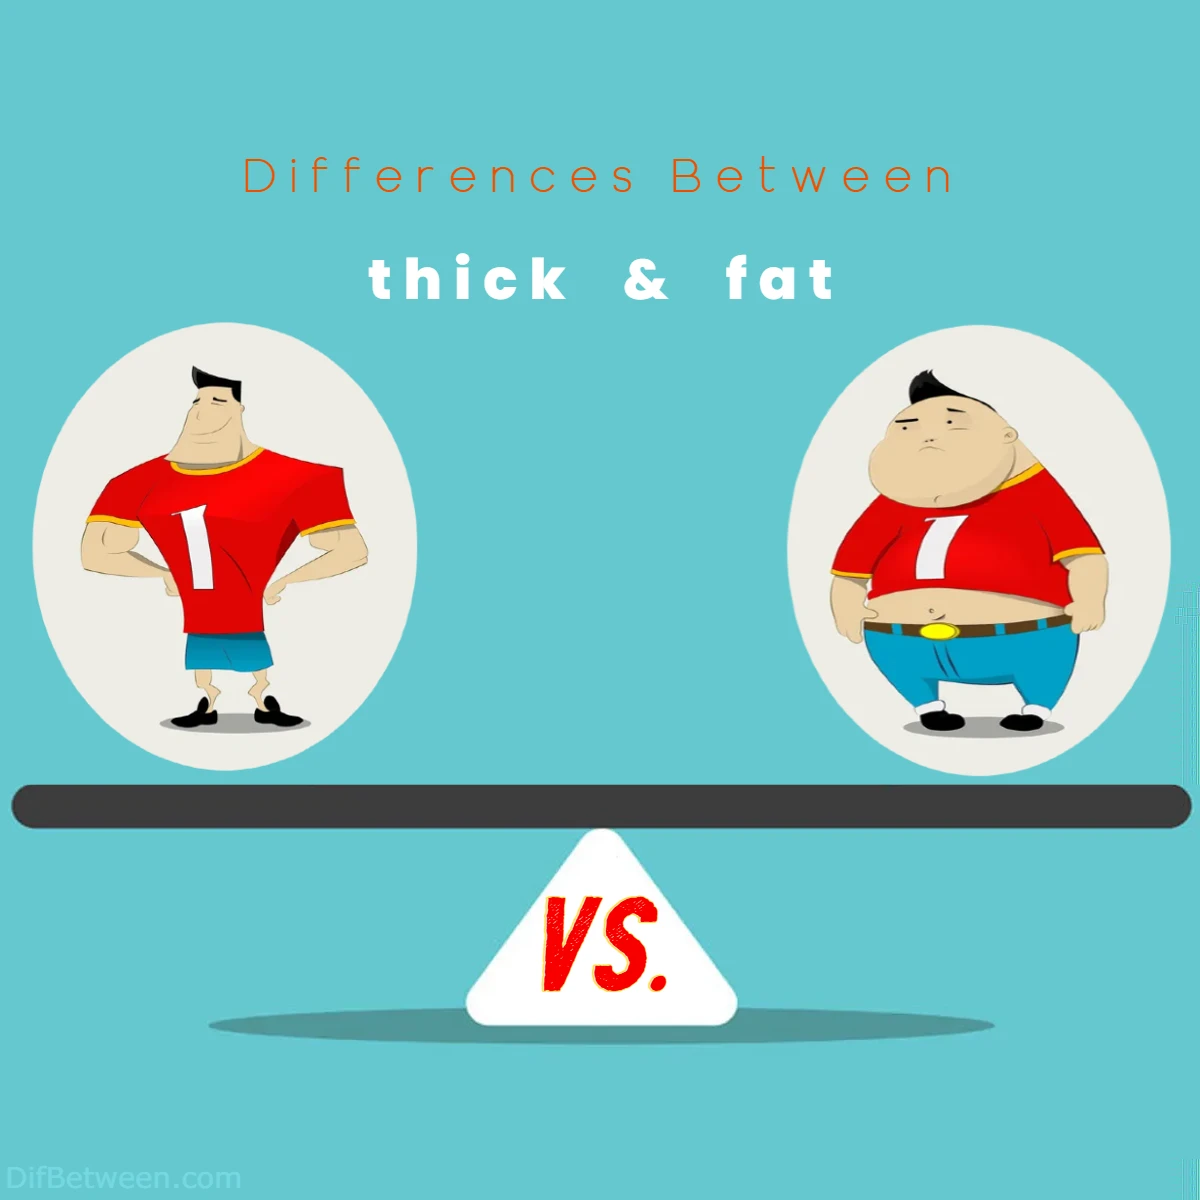 Differences Between thick vs fat